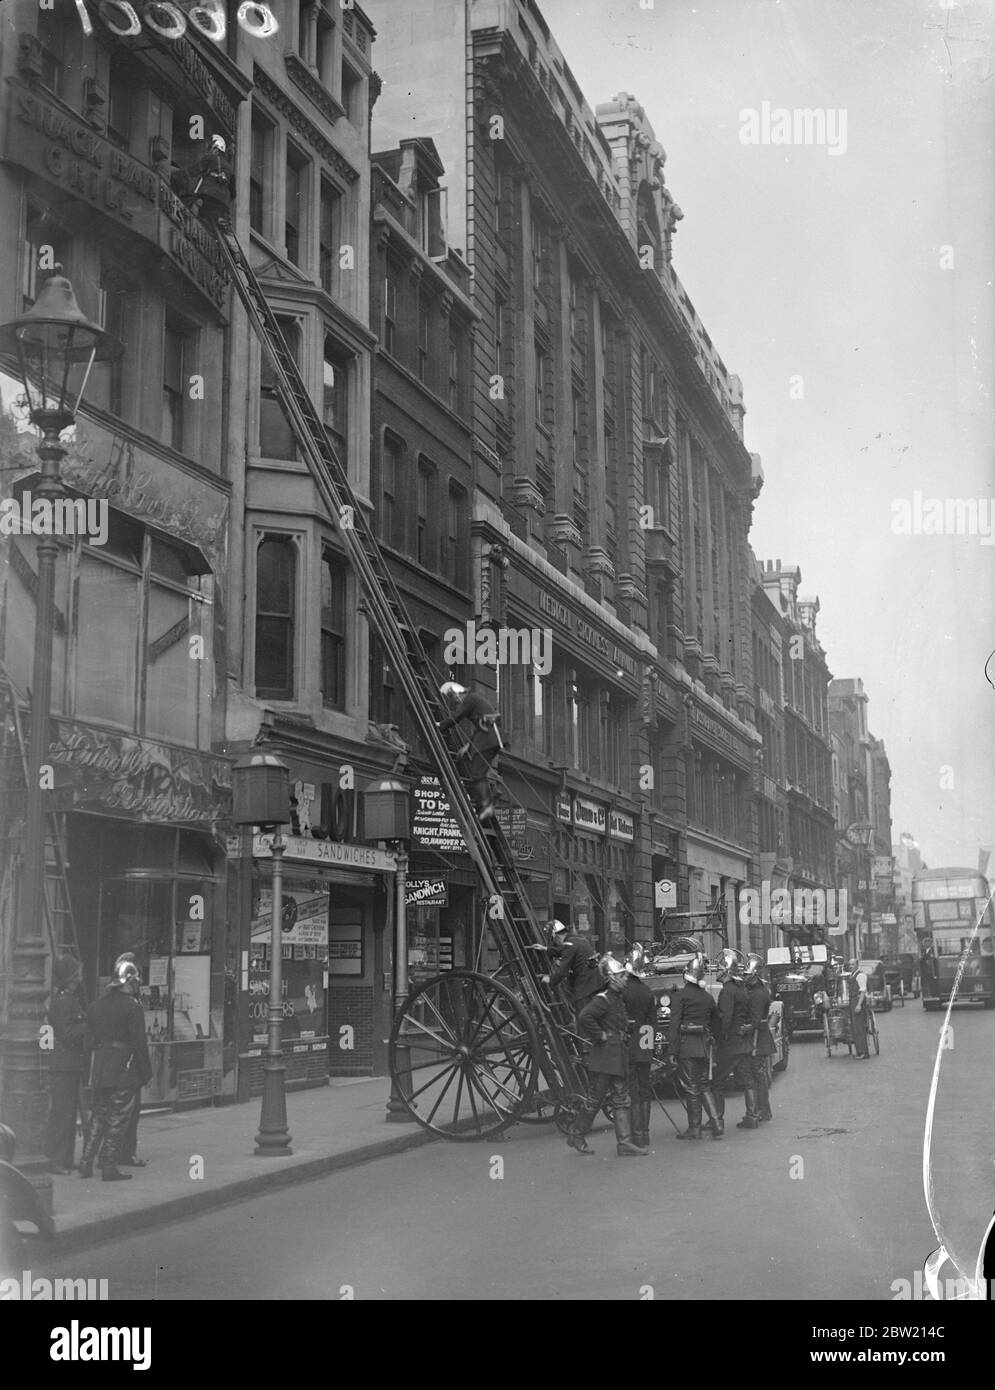 Firemen mounting the escape to enter the window at the scene of the fire in High Holborn this morning (Sunday). Two escapes and several pumps were called to the fire, which is believed to have been caused by the explosion a refrigerator over premises occupied by a restaurant. 27 June 1937 Stock Photo